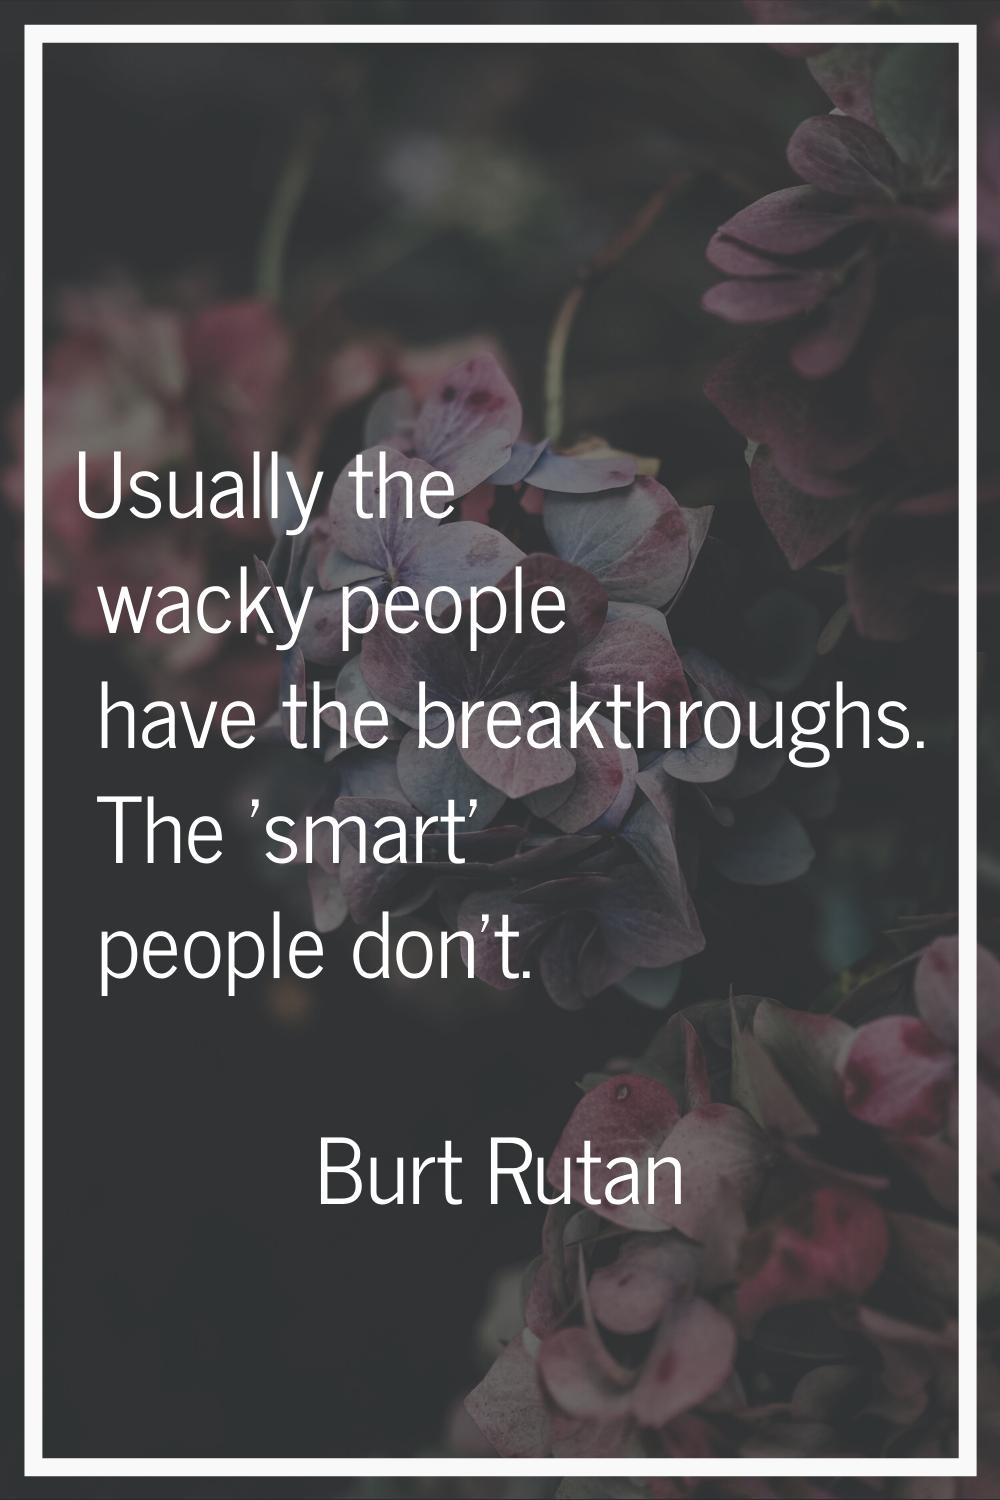 Usually the wacky people have the breakthroughs. The 'smart' people don't.